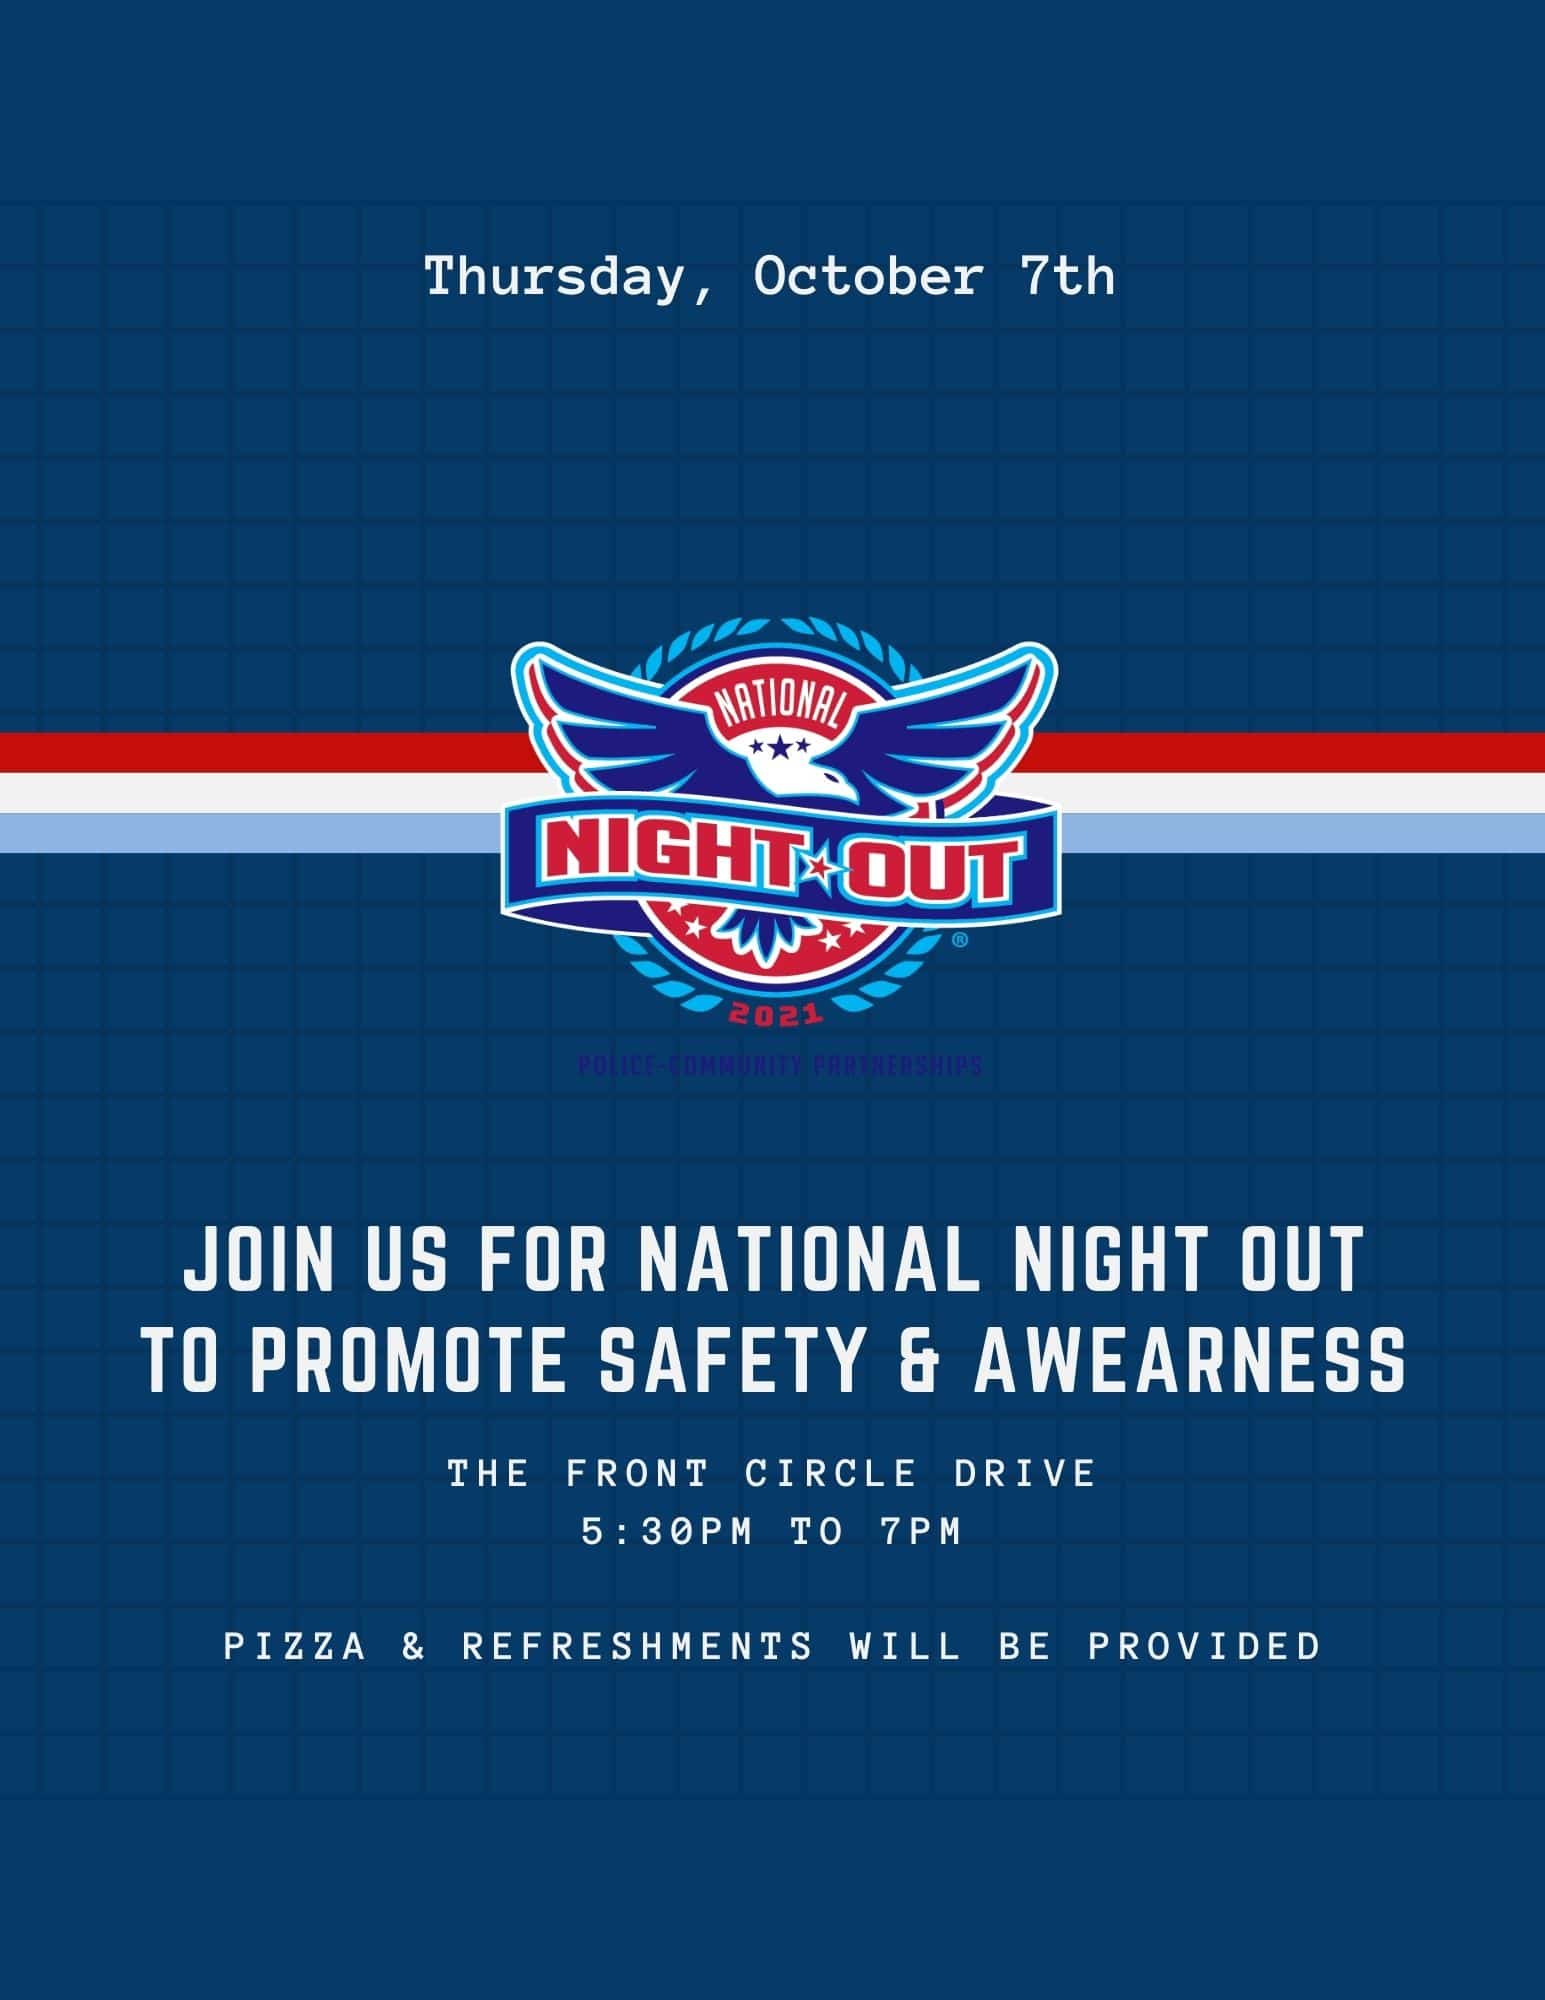 A flyer for a national night out to promote safety and awareness in The Woodlands TX.